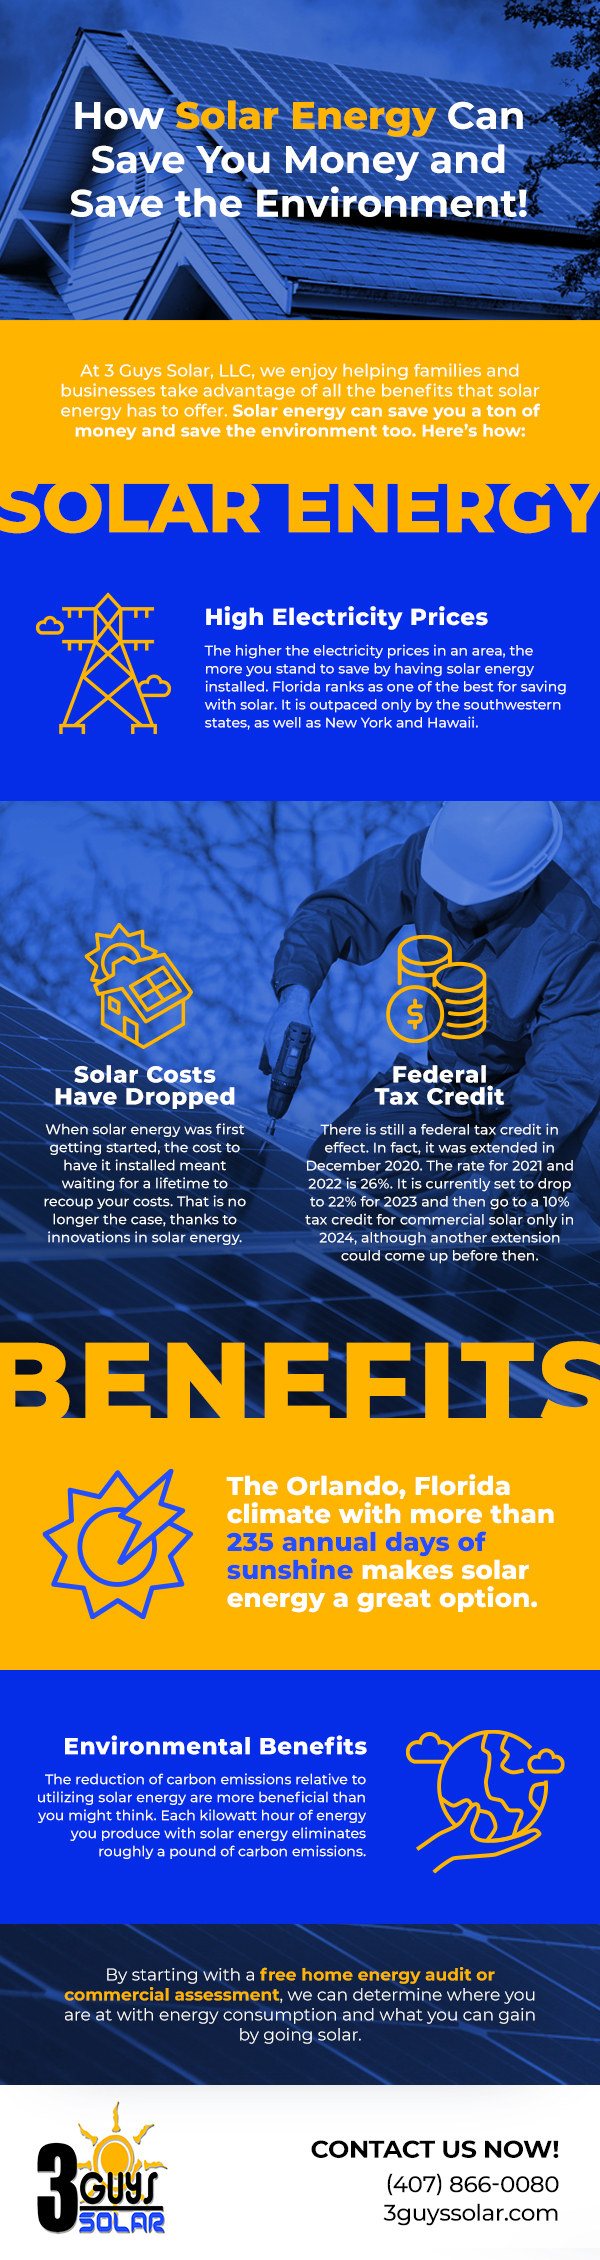 How Solar Energy Can Save You Money and Save the Environment Too! [infographic]